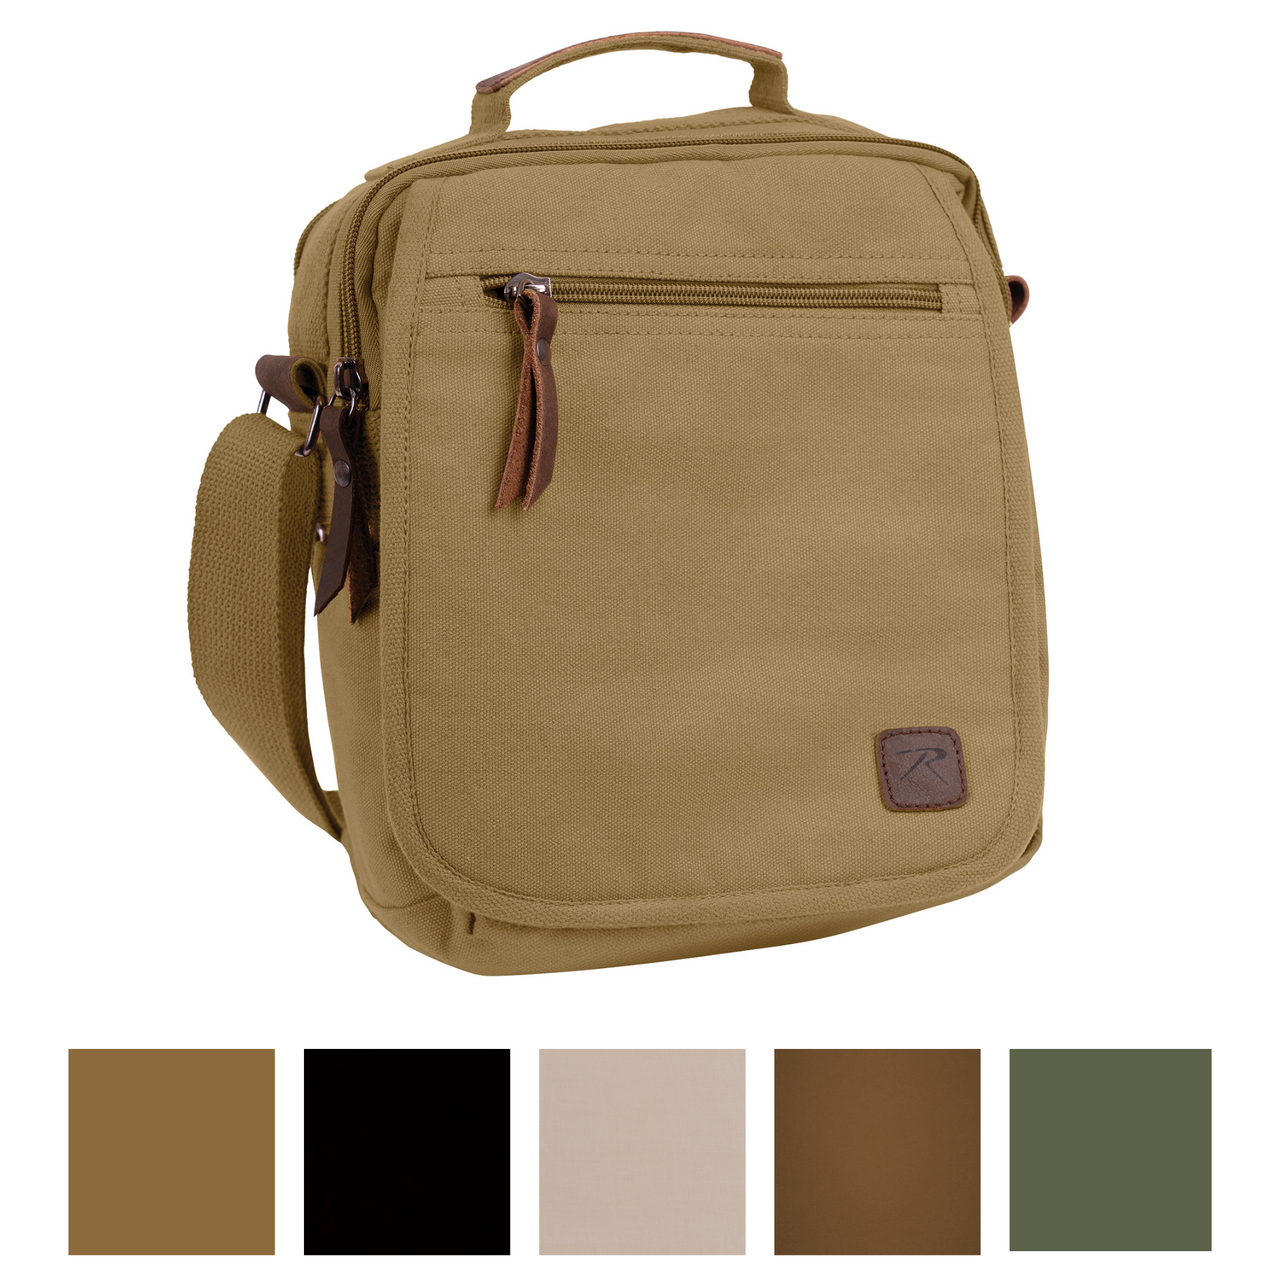 Buy Baggit Jack Extra Small Brown Travel Pouch online